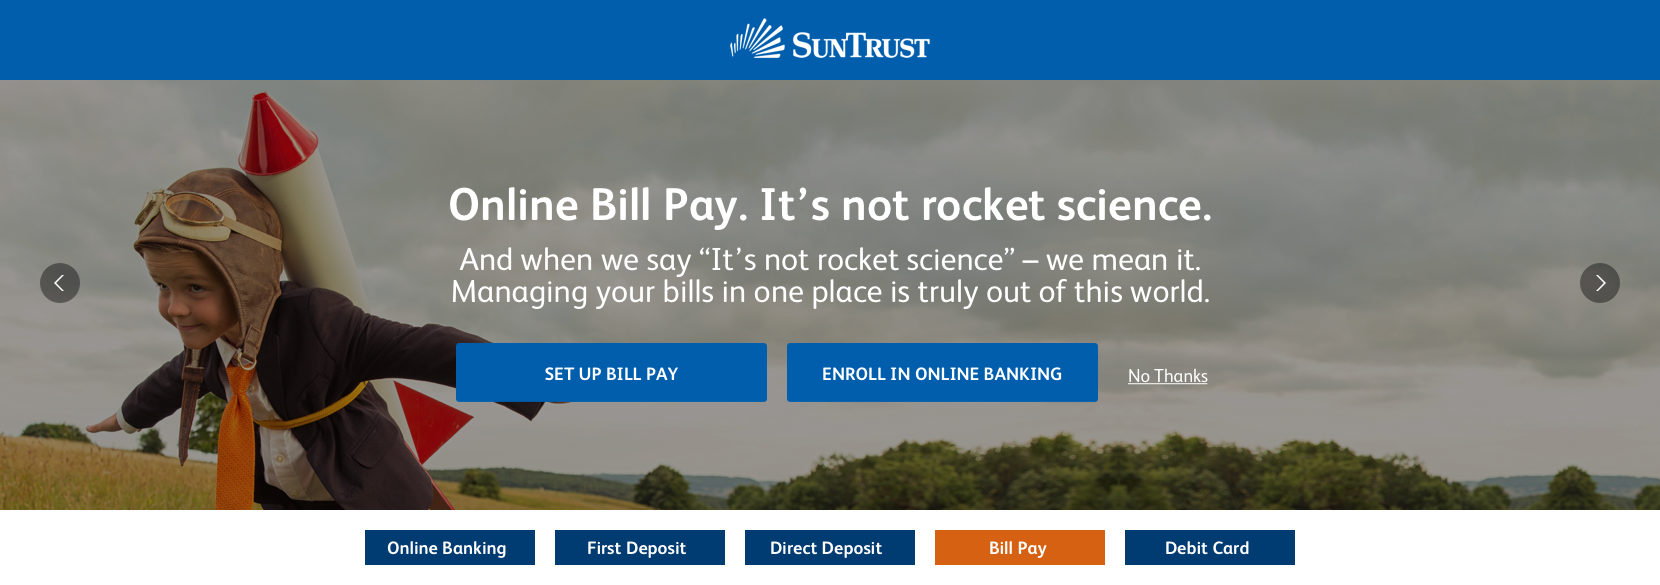 Bill Pay.png